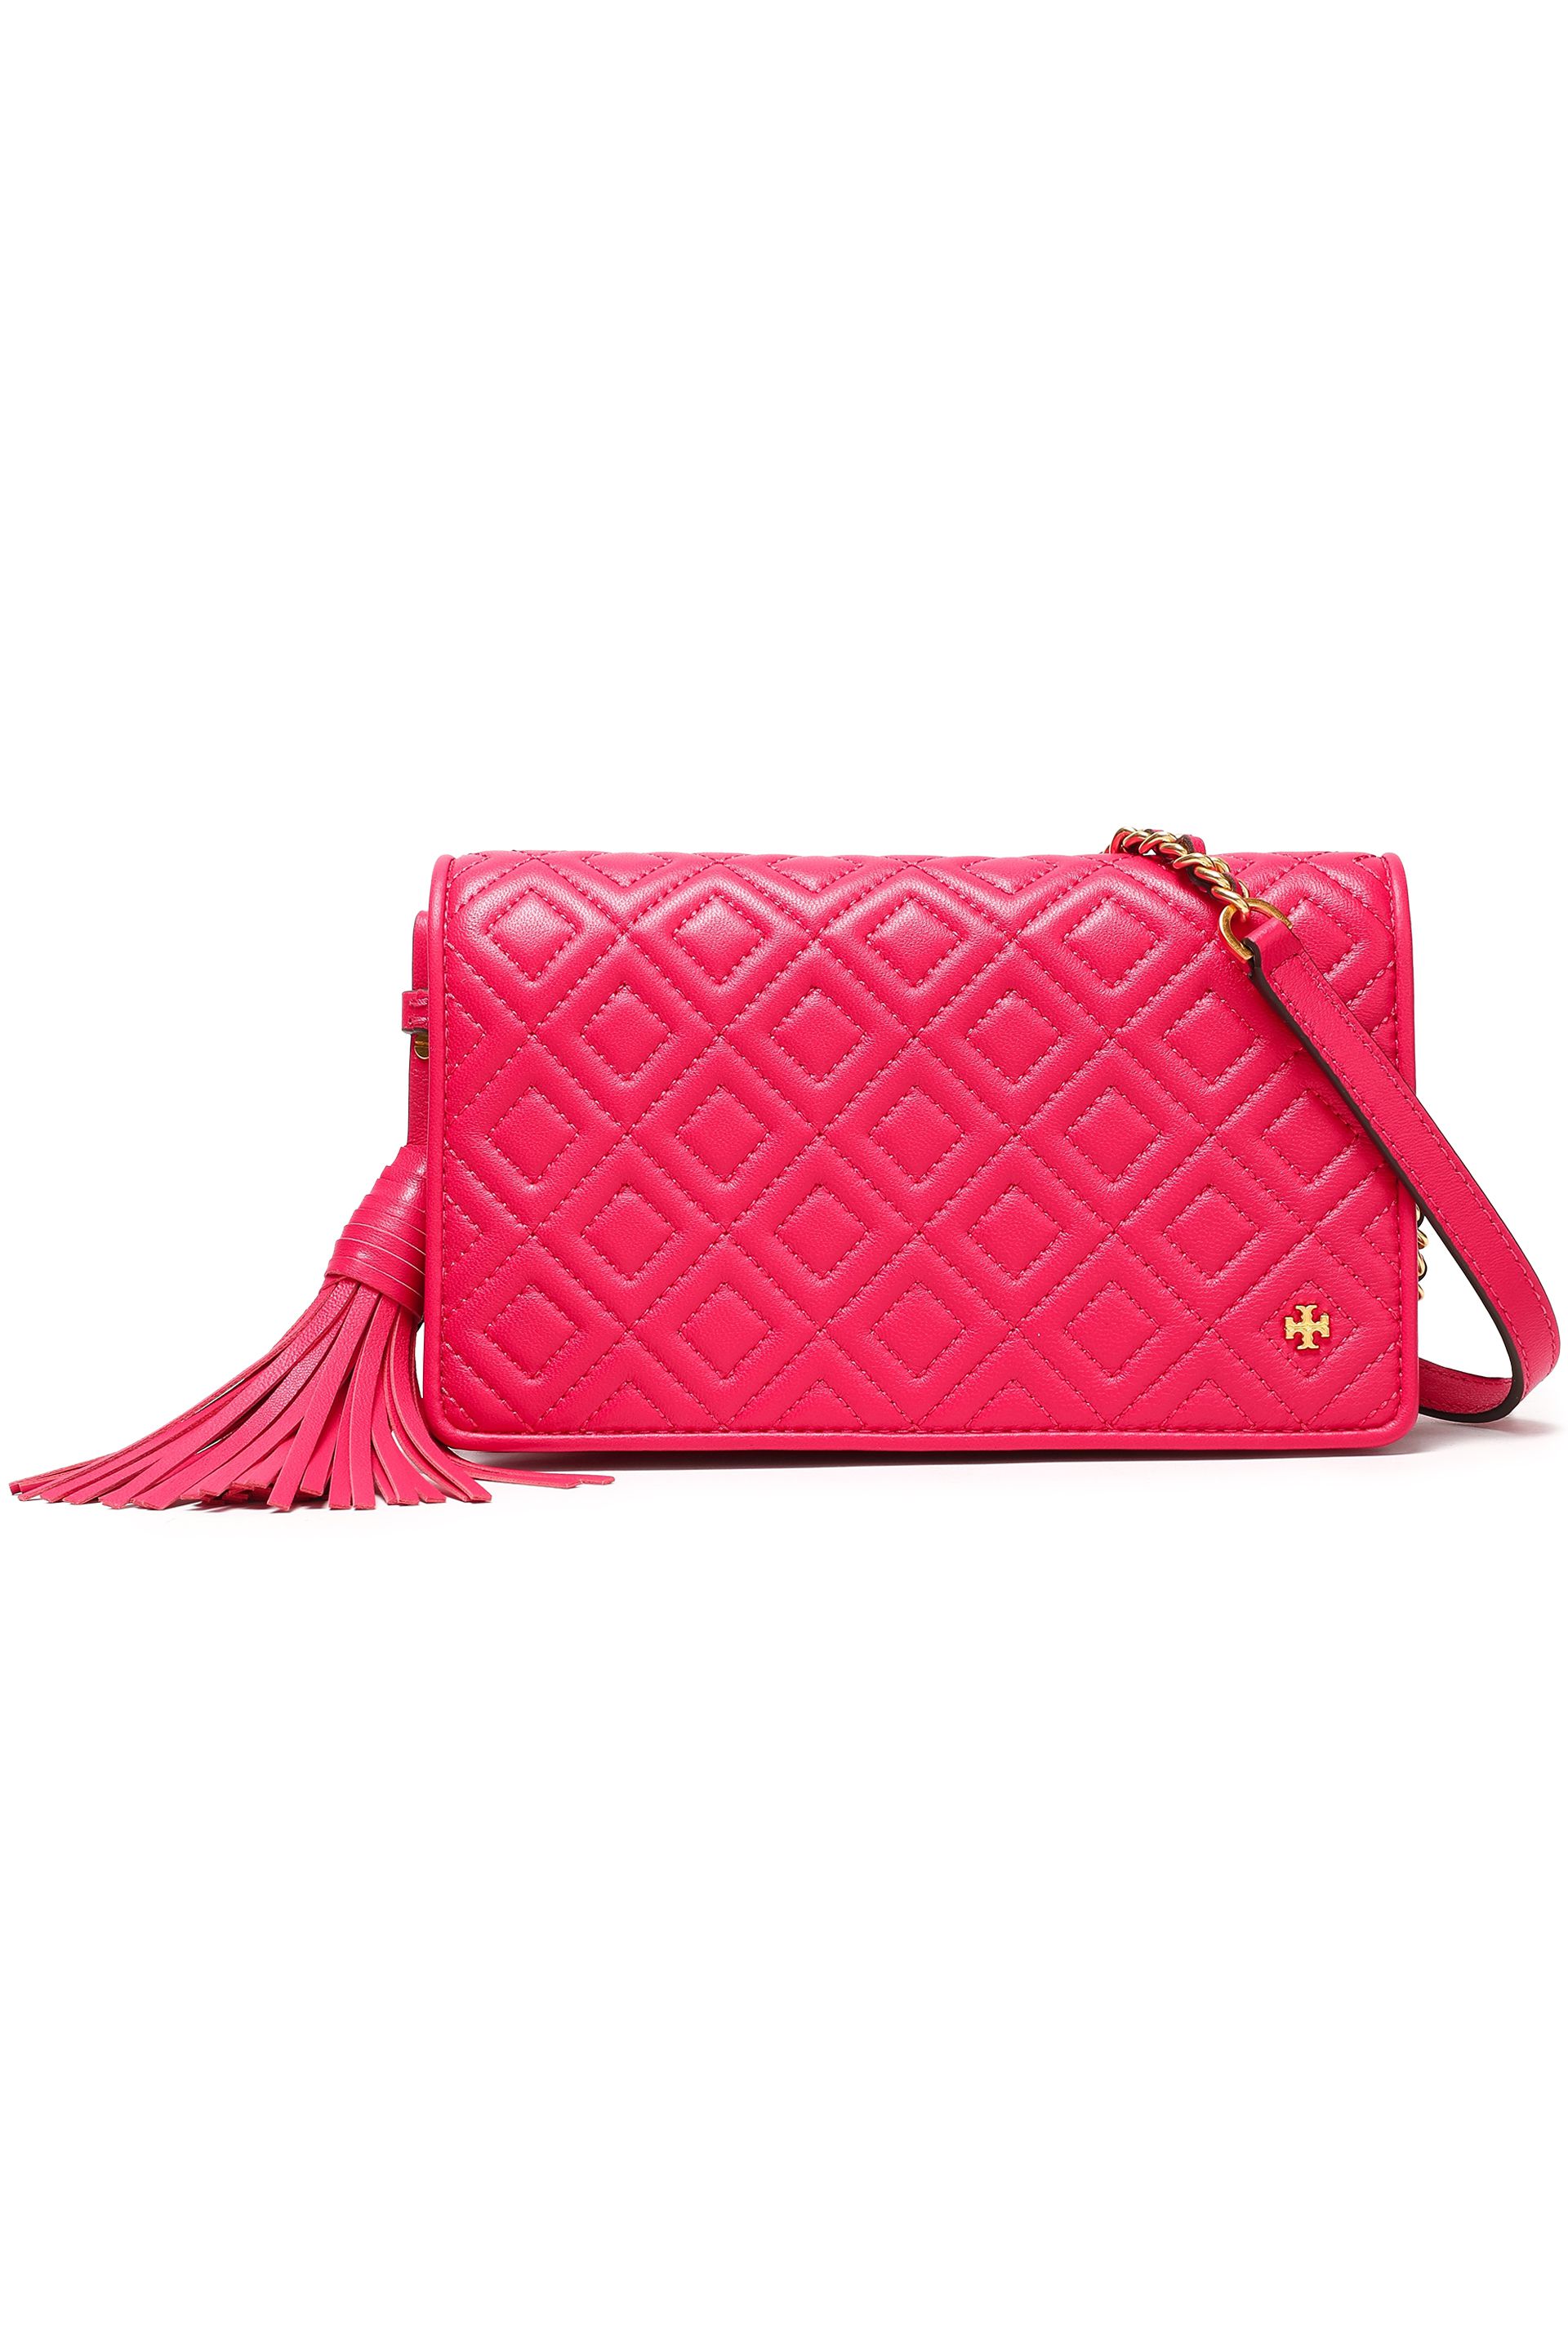 Tory Burch | Sale Up To 70% Off At THE OUTNET